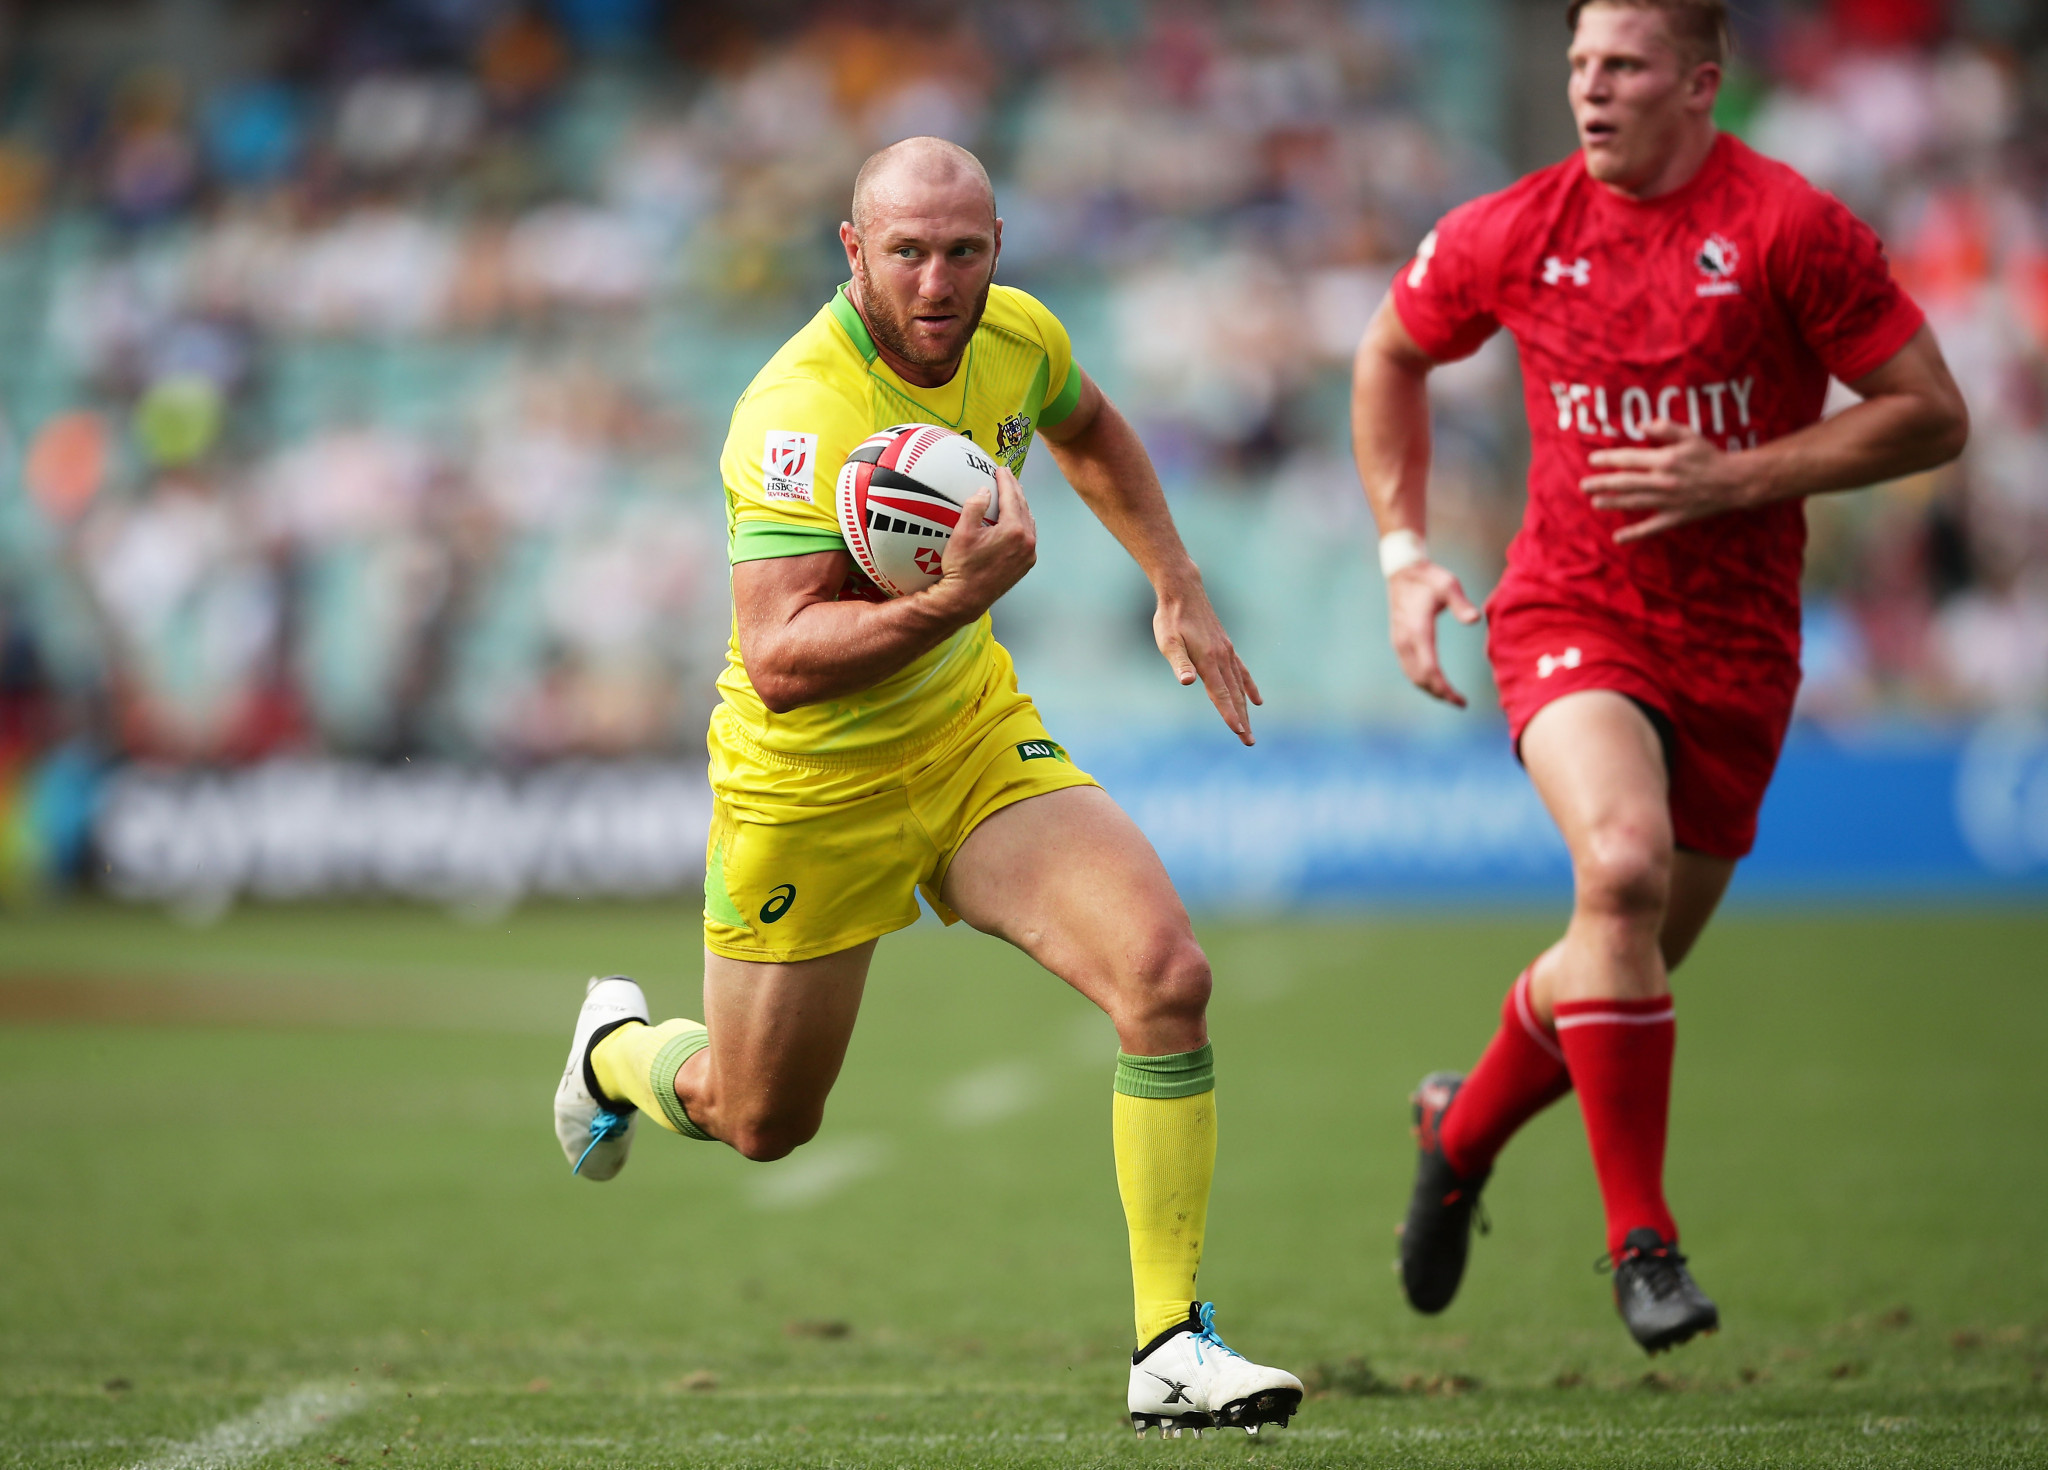 Australia rugby sevens captain discharged from hospital after fracturing skull in assault in Sydney